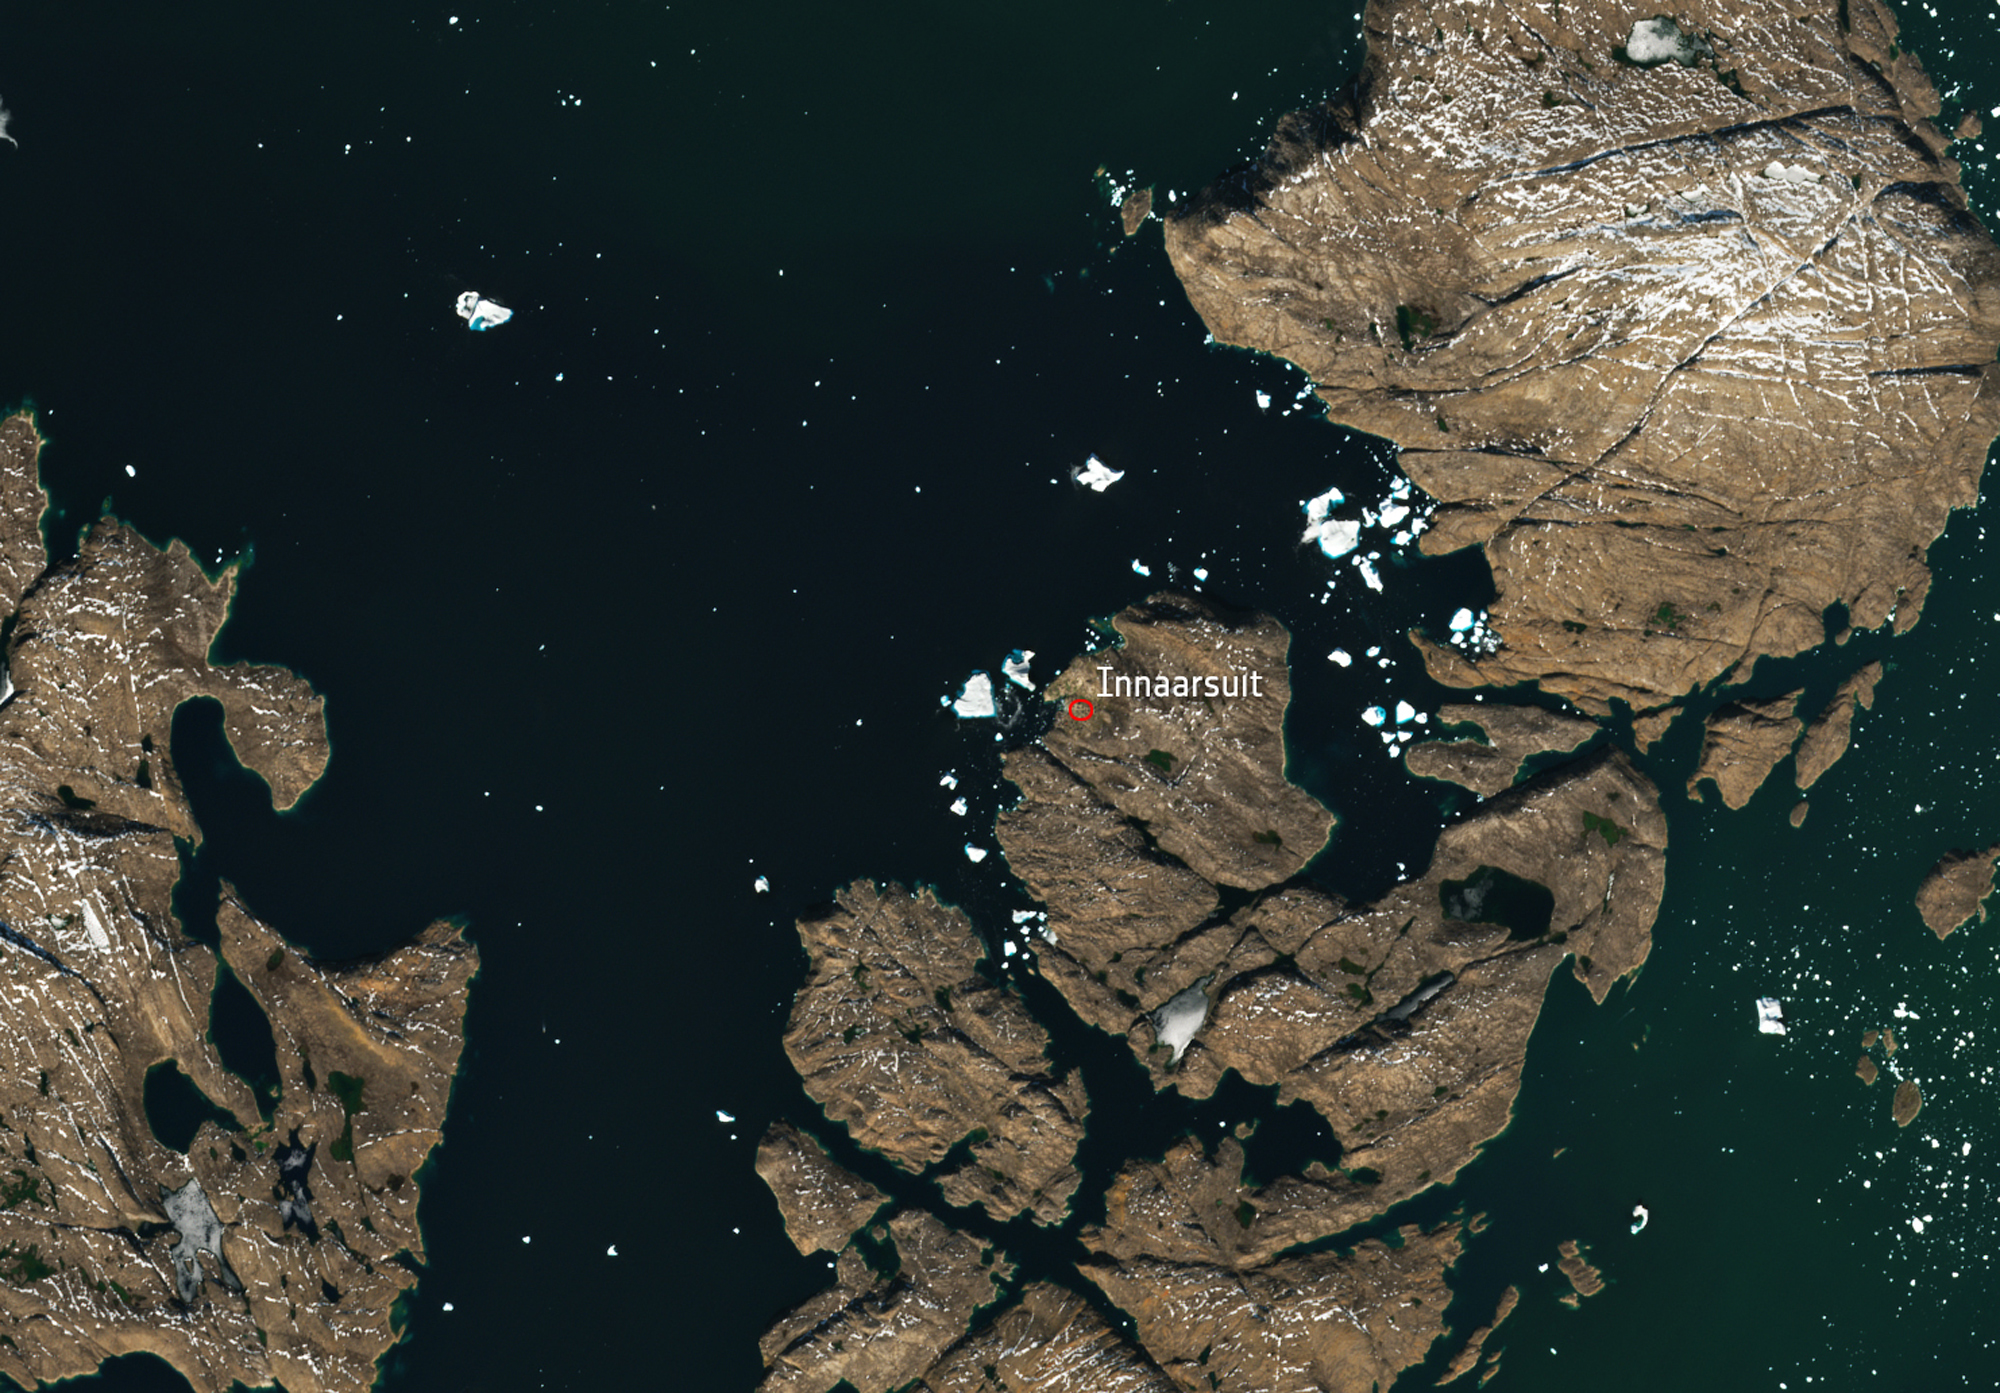 A satellite image shows a huge iceberg perilously close to the village of Innaarsuit